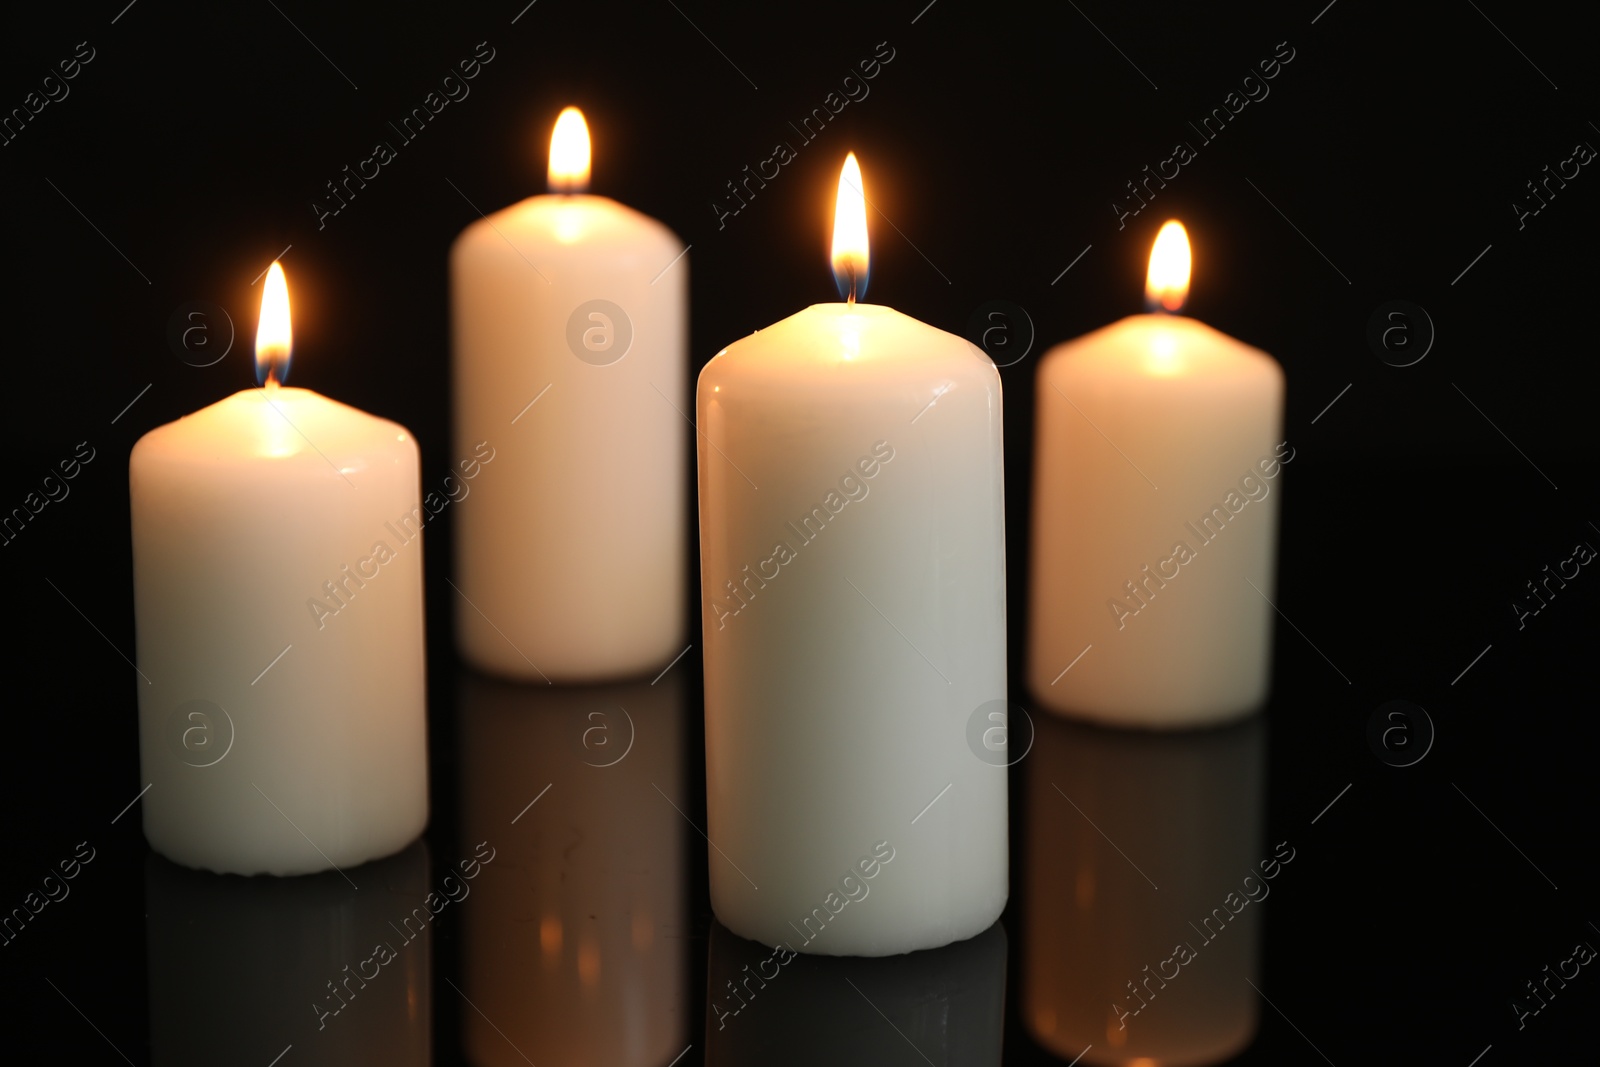 Photo of Many burning candles on mirror surface against black background